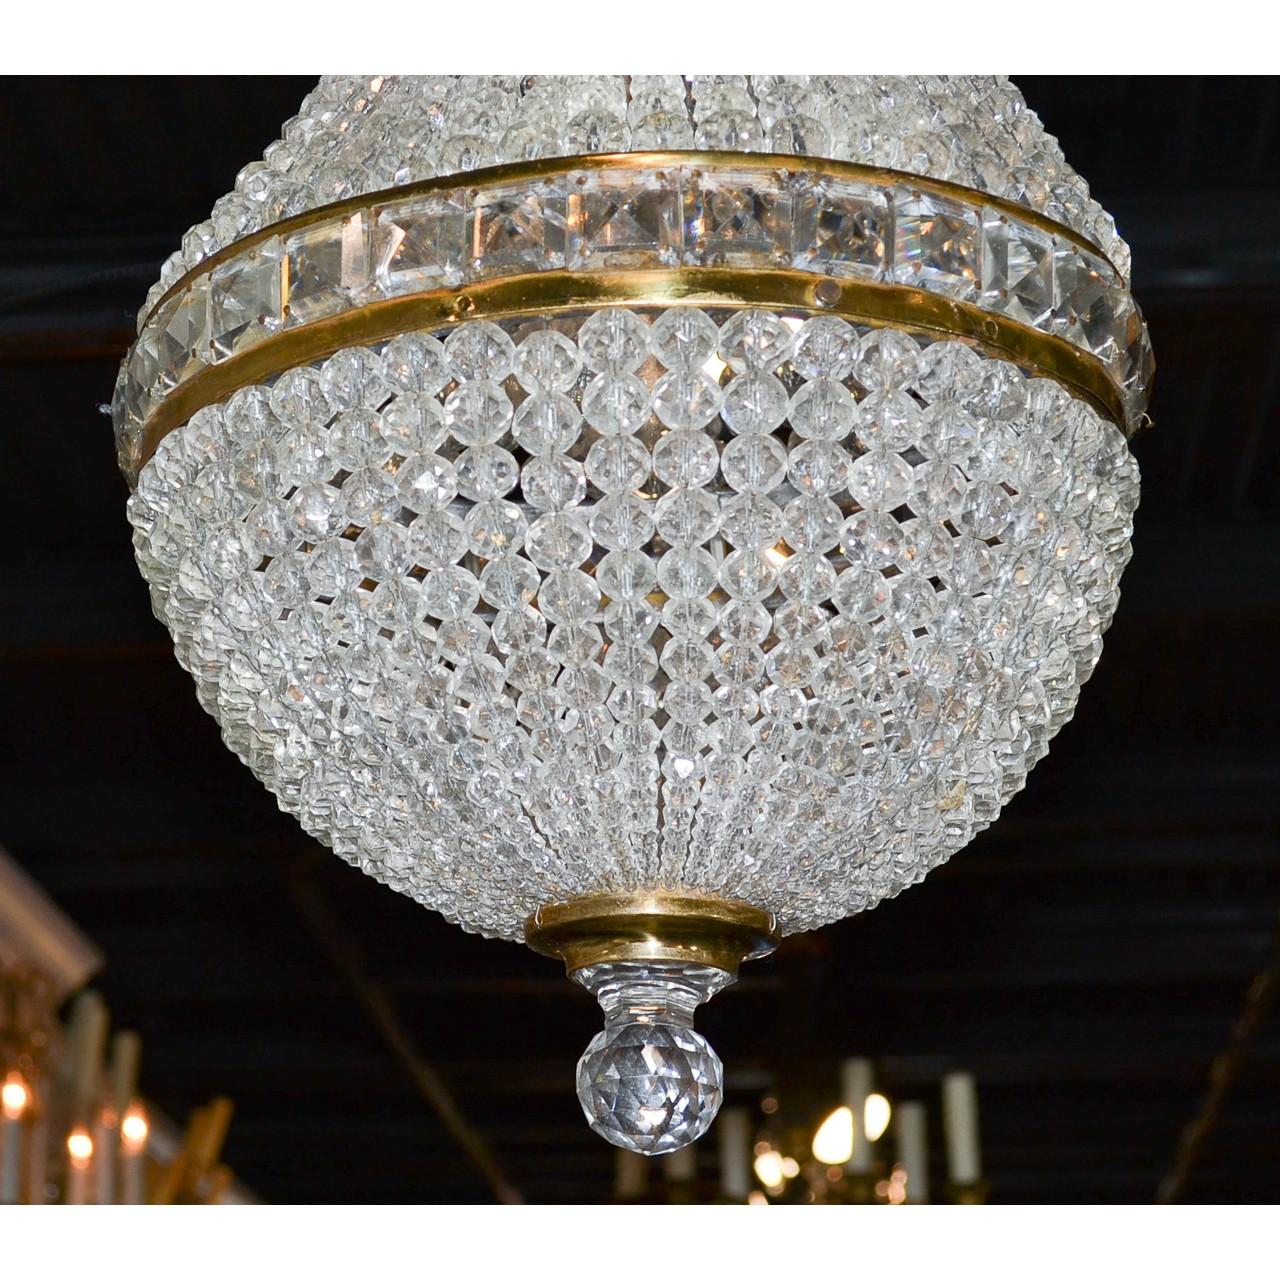 Elegant early 20th century French gilt bronze and crystal basket chandelier. The crown and central band inlaid with square baguette cut crystal prisms. The entire with multiple strands of cascading bead crystals. The base accented with a faceted